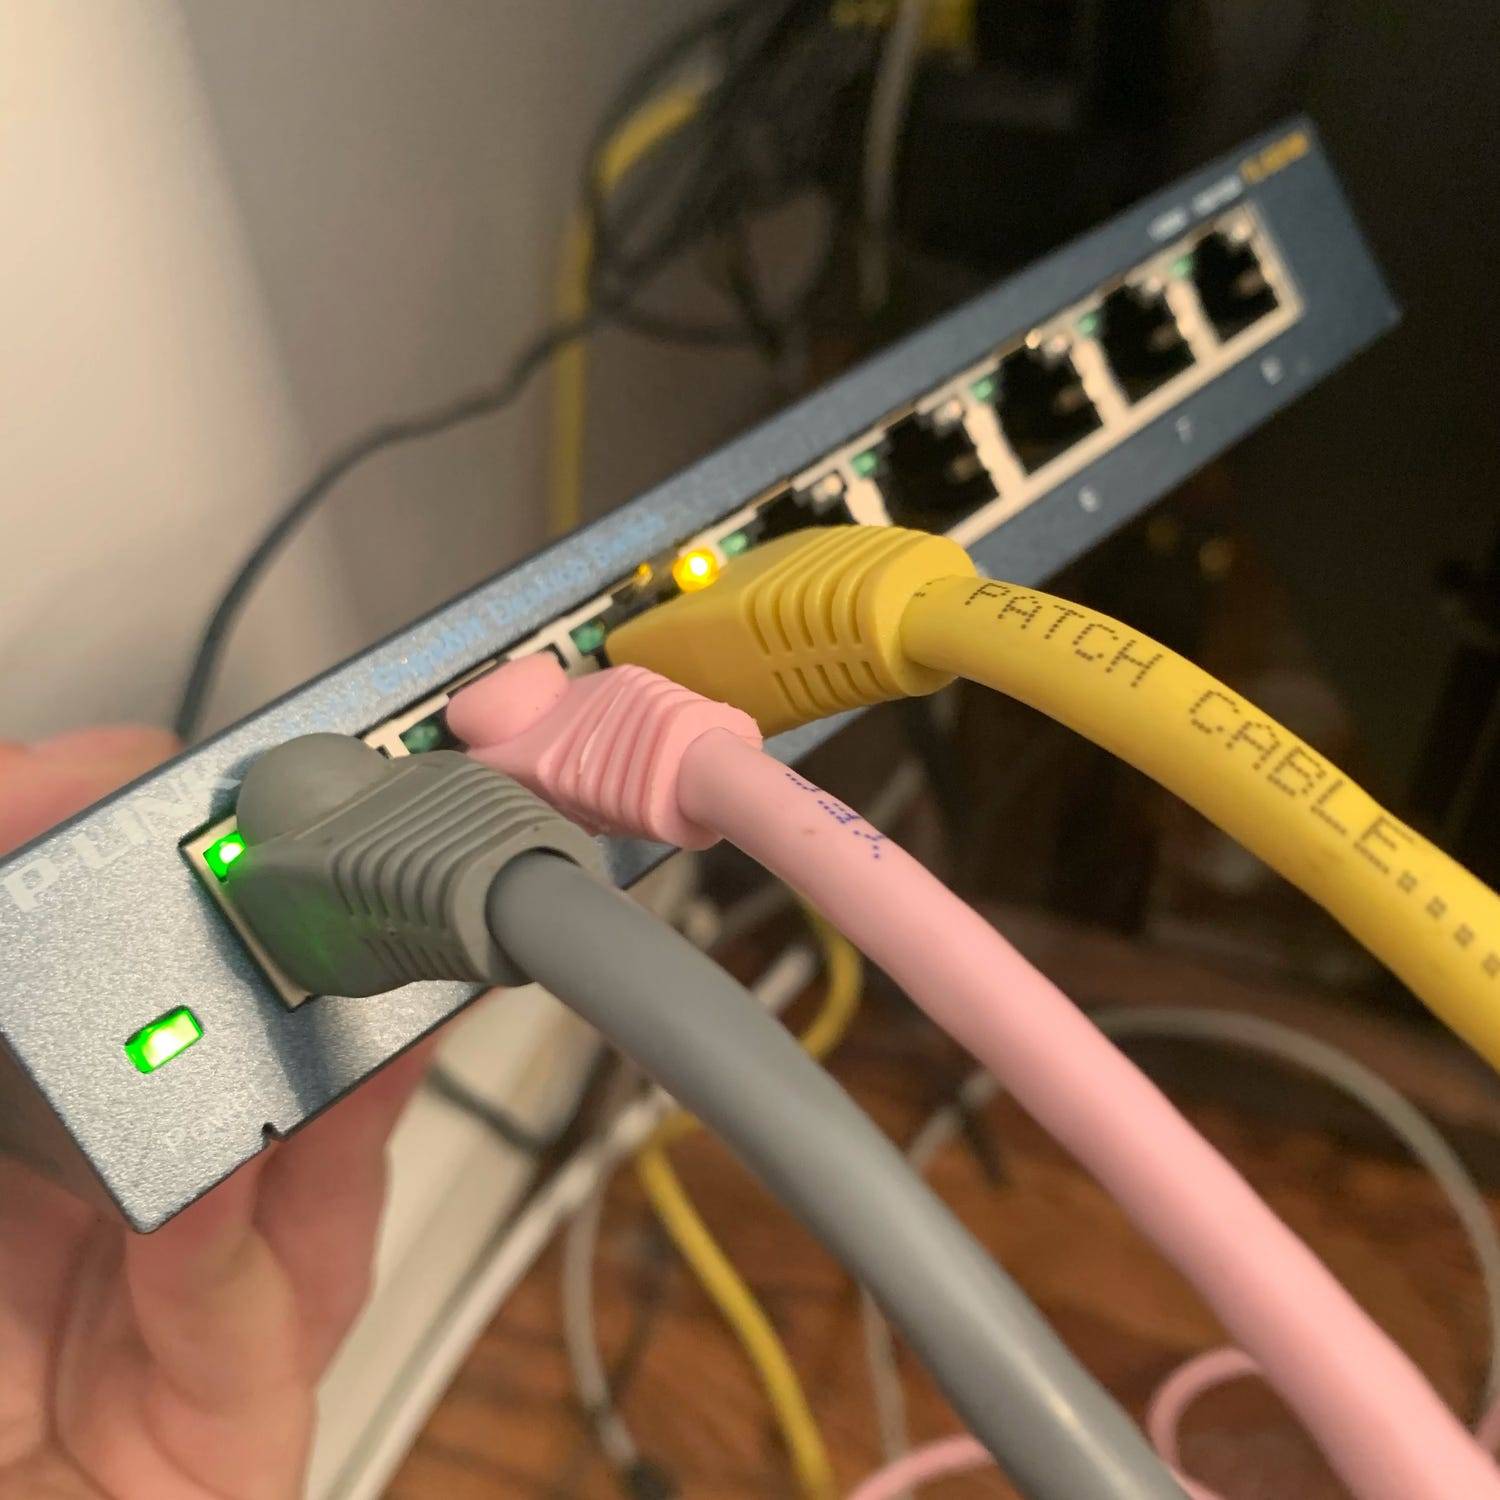 What is an Ethernet cable? Here's how to connect to the internet without Wi-Fi and get a speedier connection